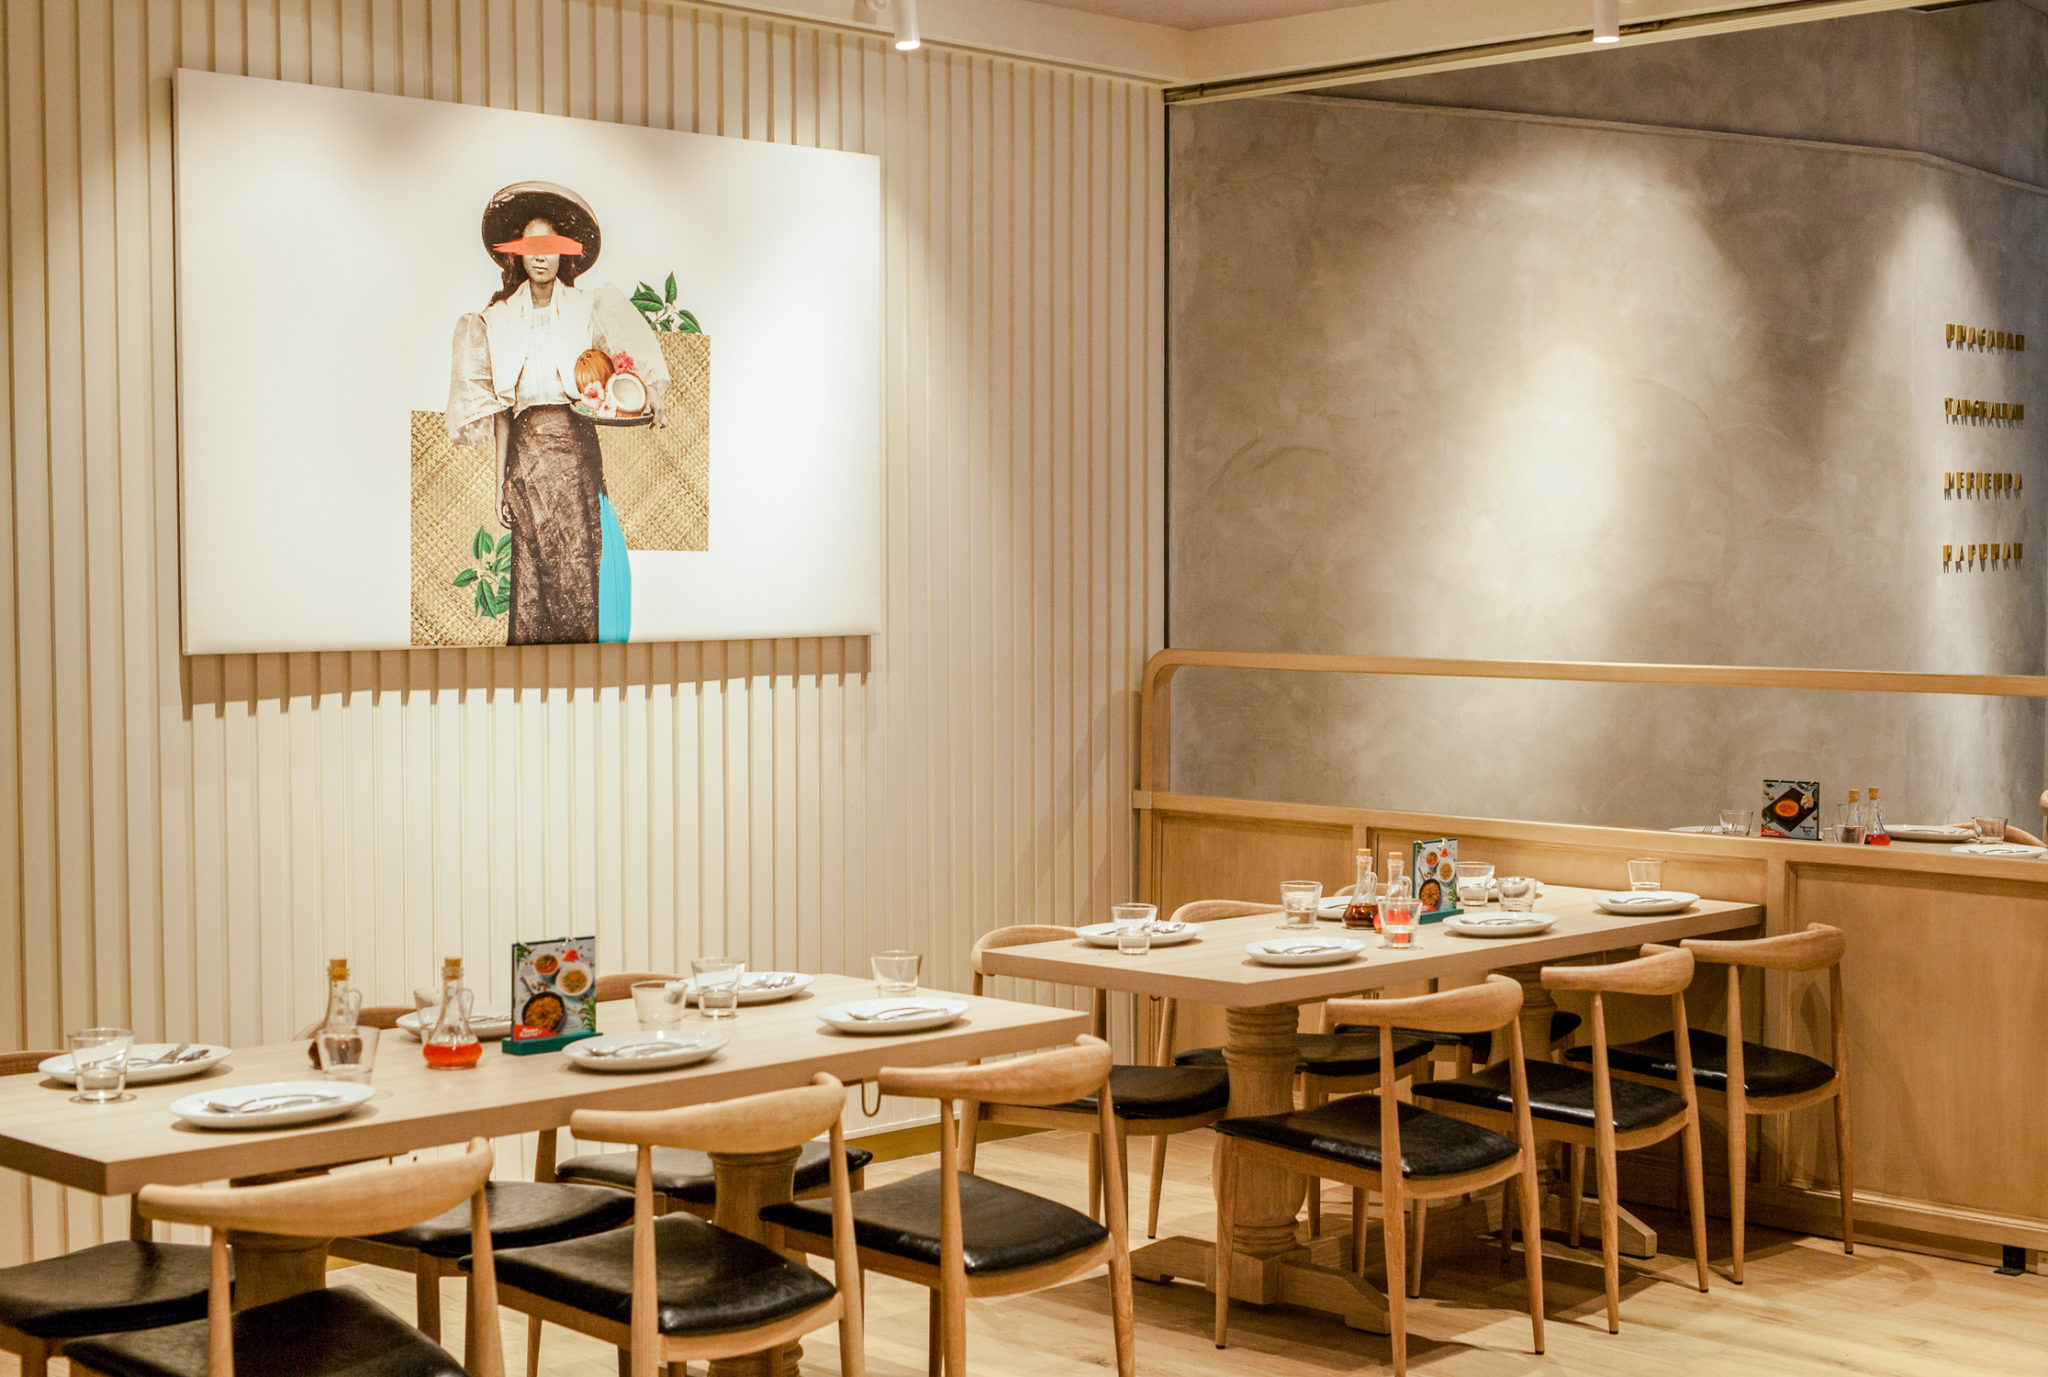 At the landmark Manam store, diners can look forward to a "supersized" menu that carries signature dishes and new pastries and desserts